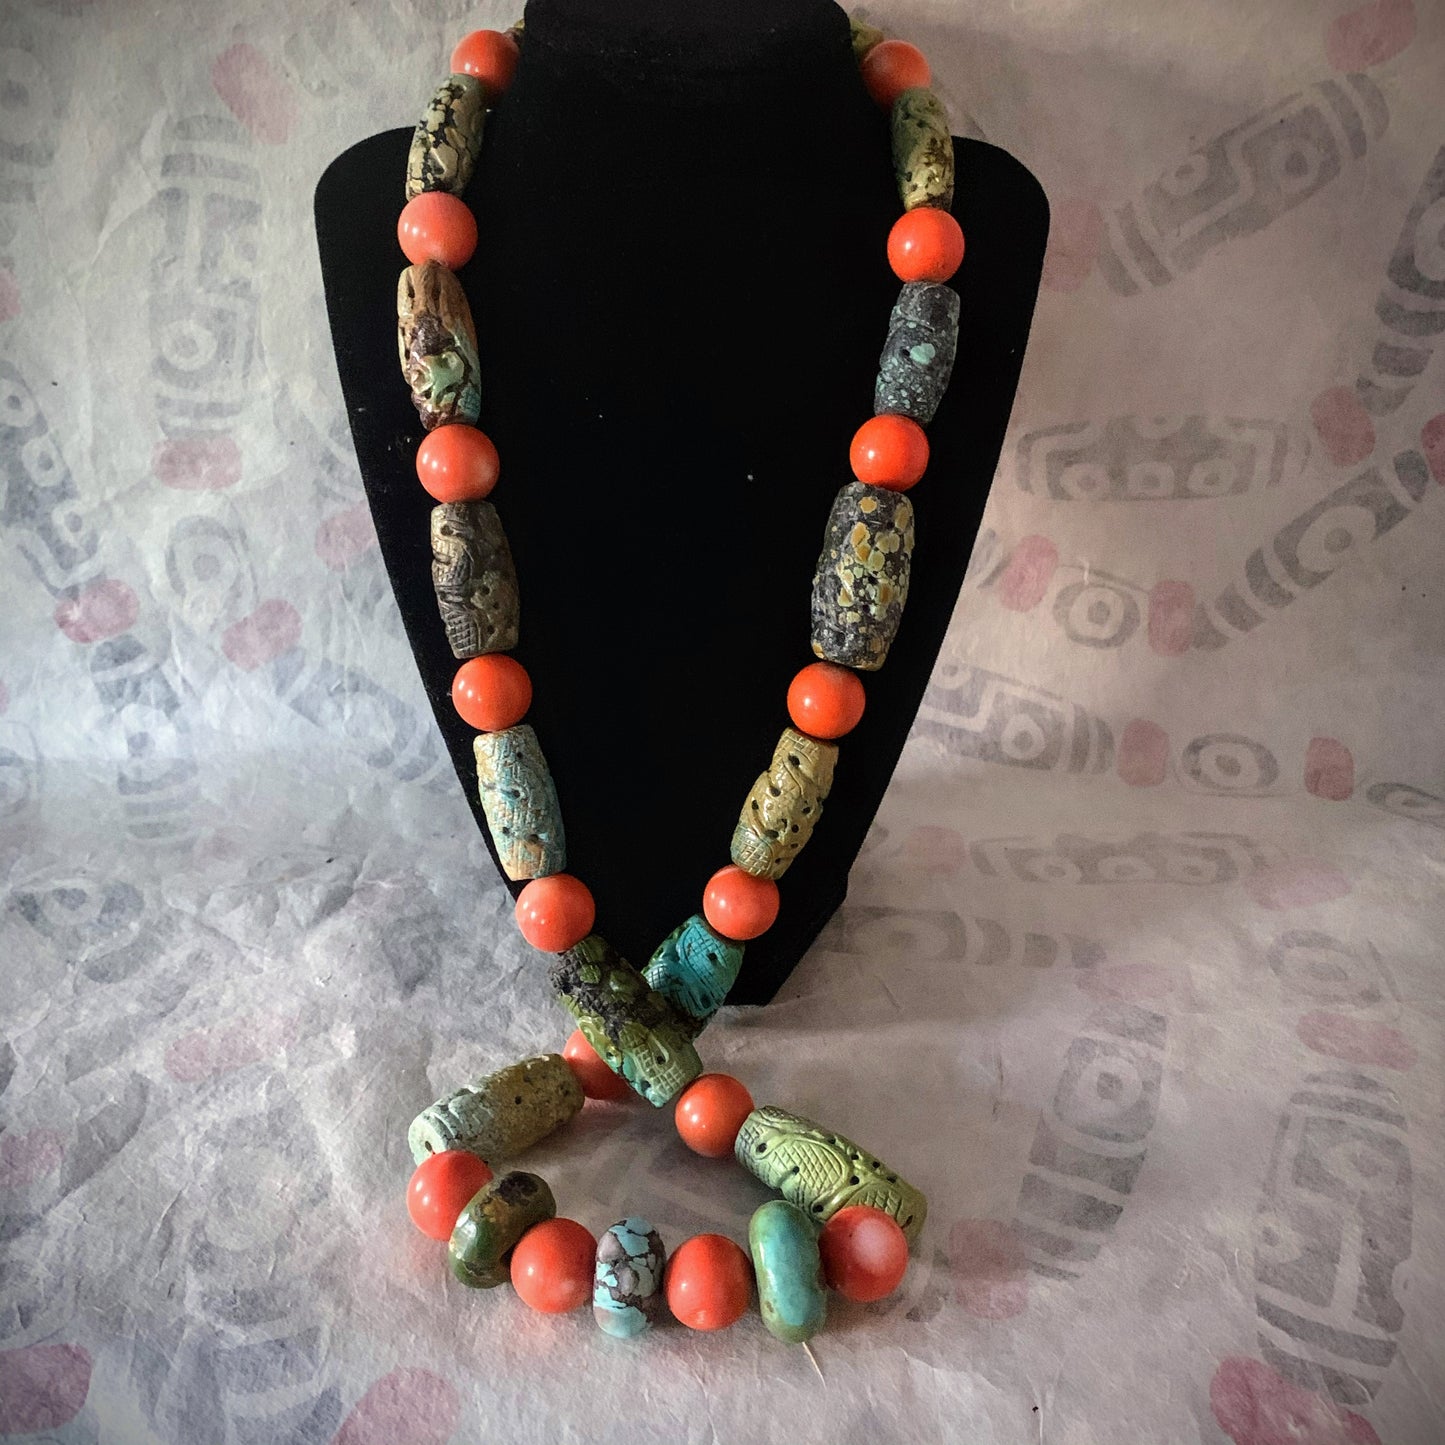 A necklace with antique carved turquoise and vintage coral beads